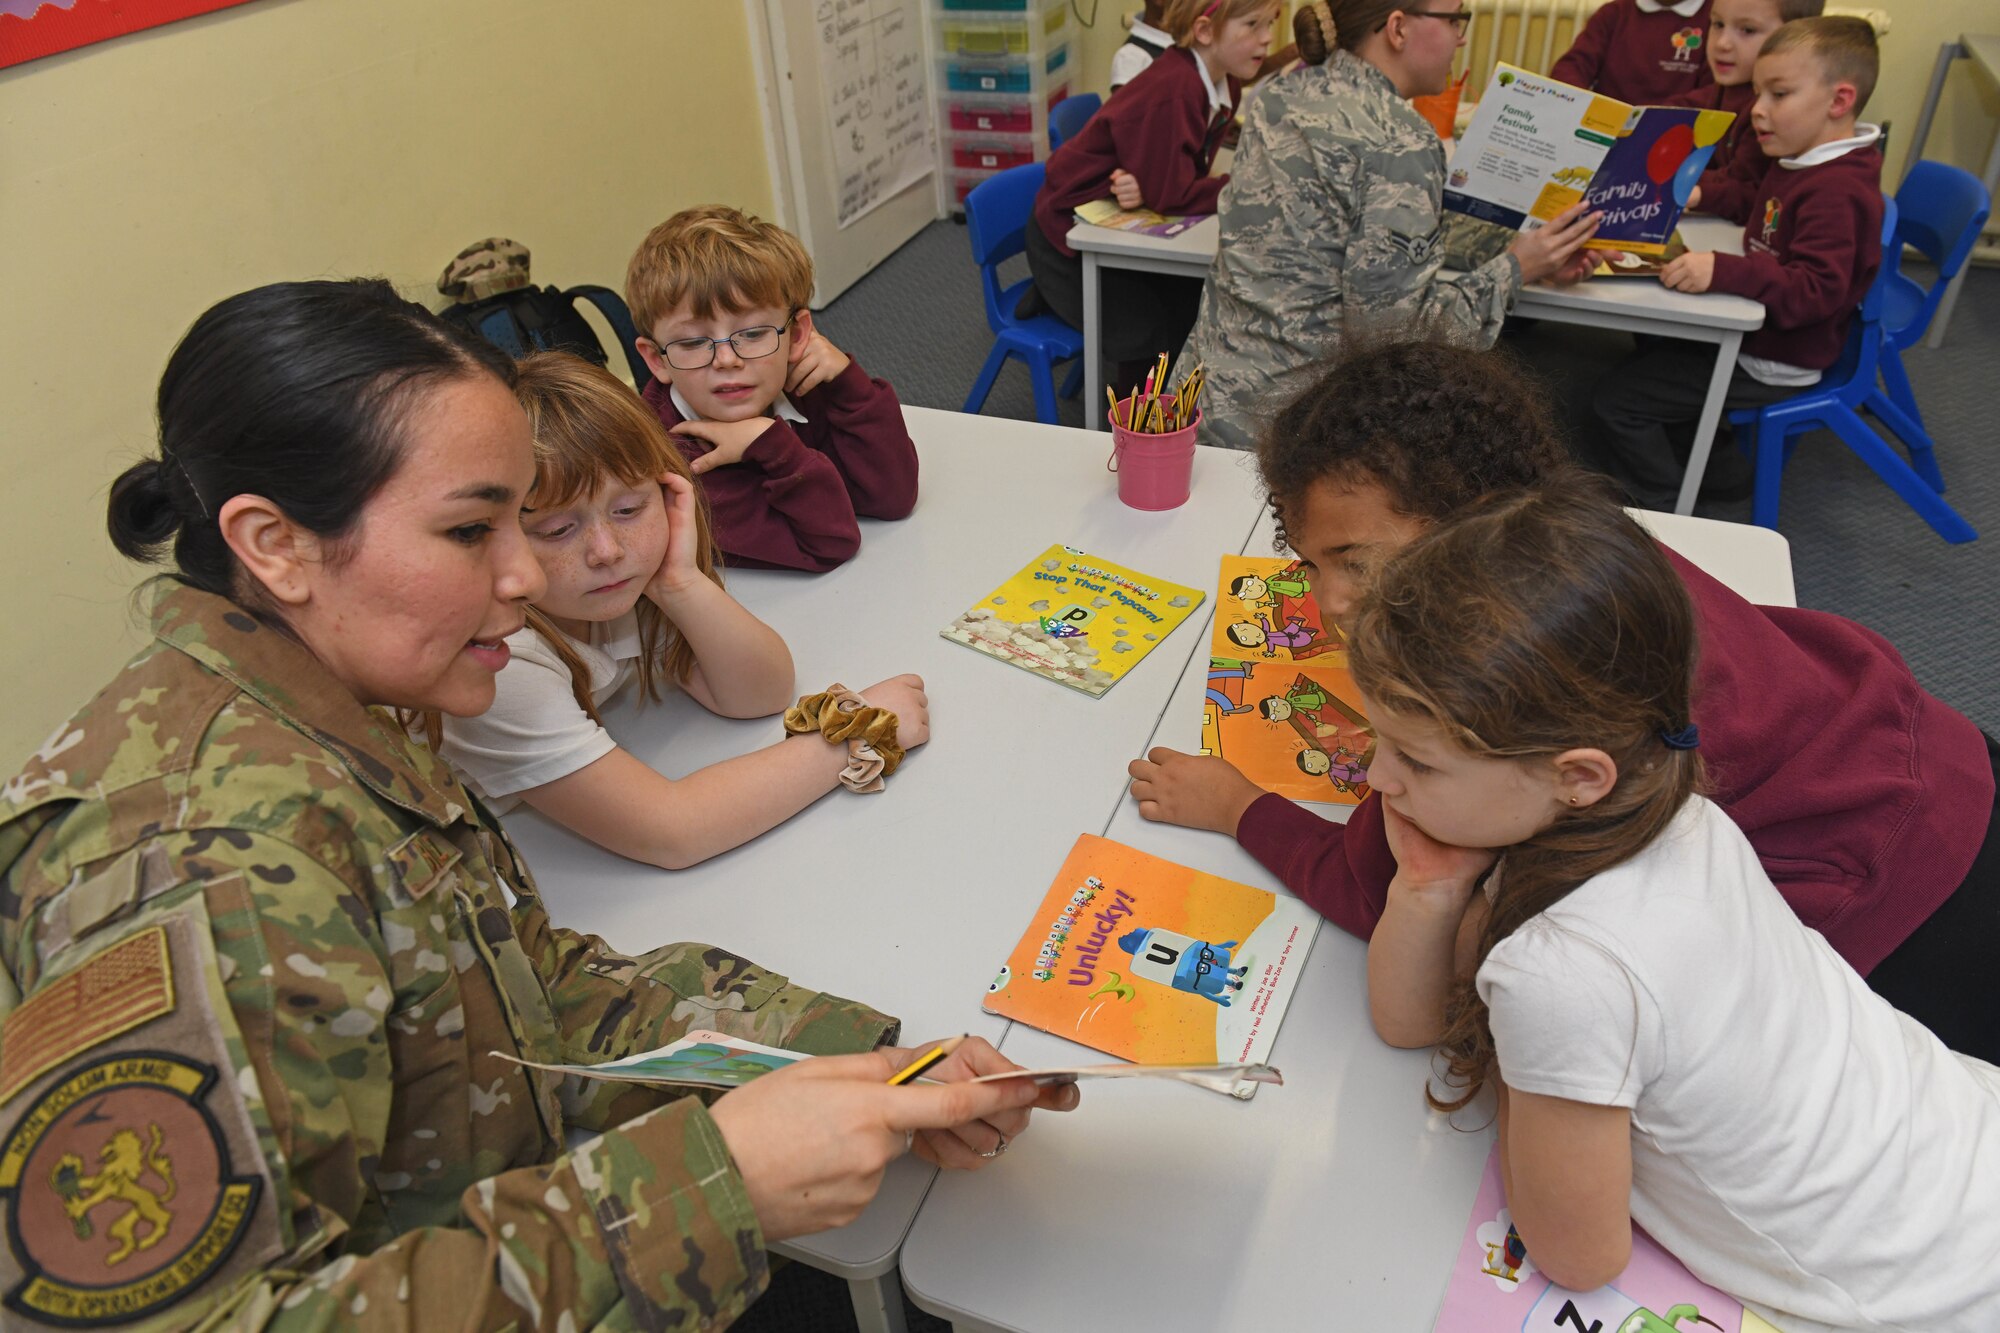 Airman 1st Class Janet Abilez, 100th Operations Support Squadron airfield management coordinator, reads a book to children at Houldsworth Valley Primary School in Newmarket, England, Nov. 26, 2019. Airmen from Team Mildenhall volunteered their time to go to the school to read books with the children and talk about their jobs on base. (U.S. Air Force photo by Senior Airman Luke Milano)